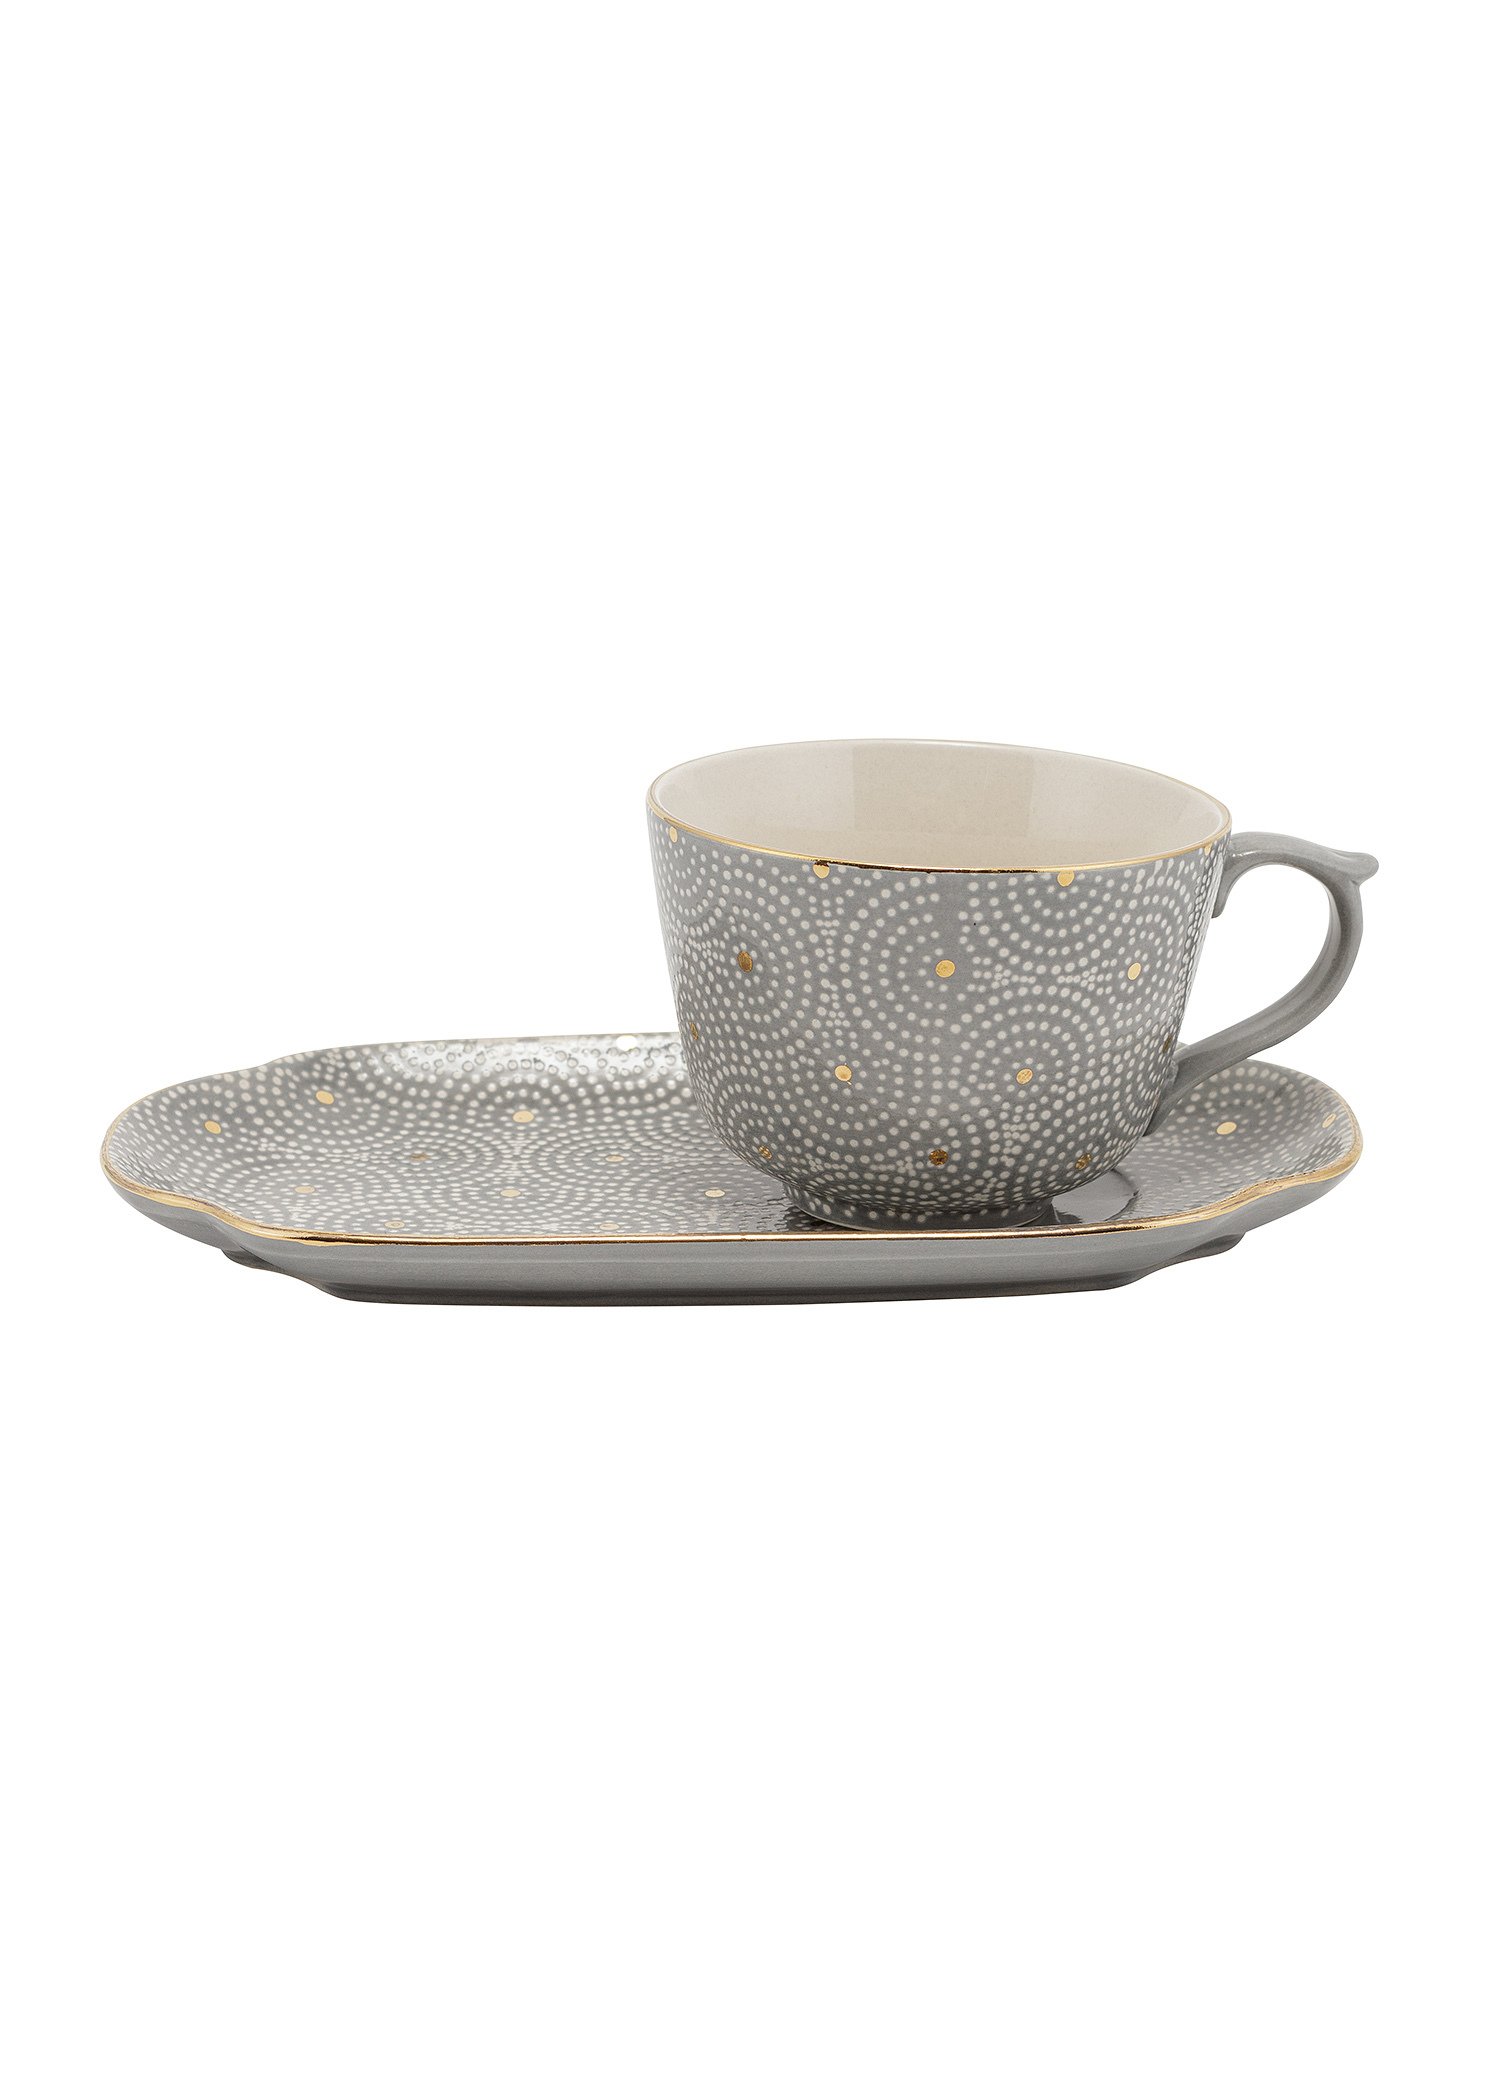 Stoneware cup and saucer Image 0